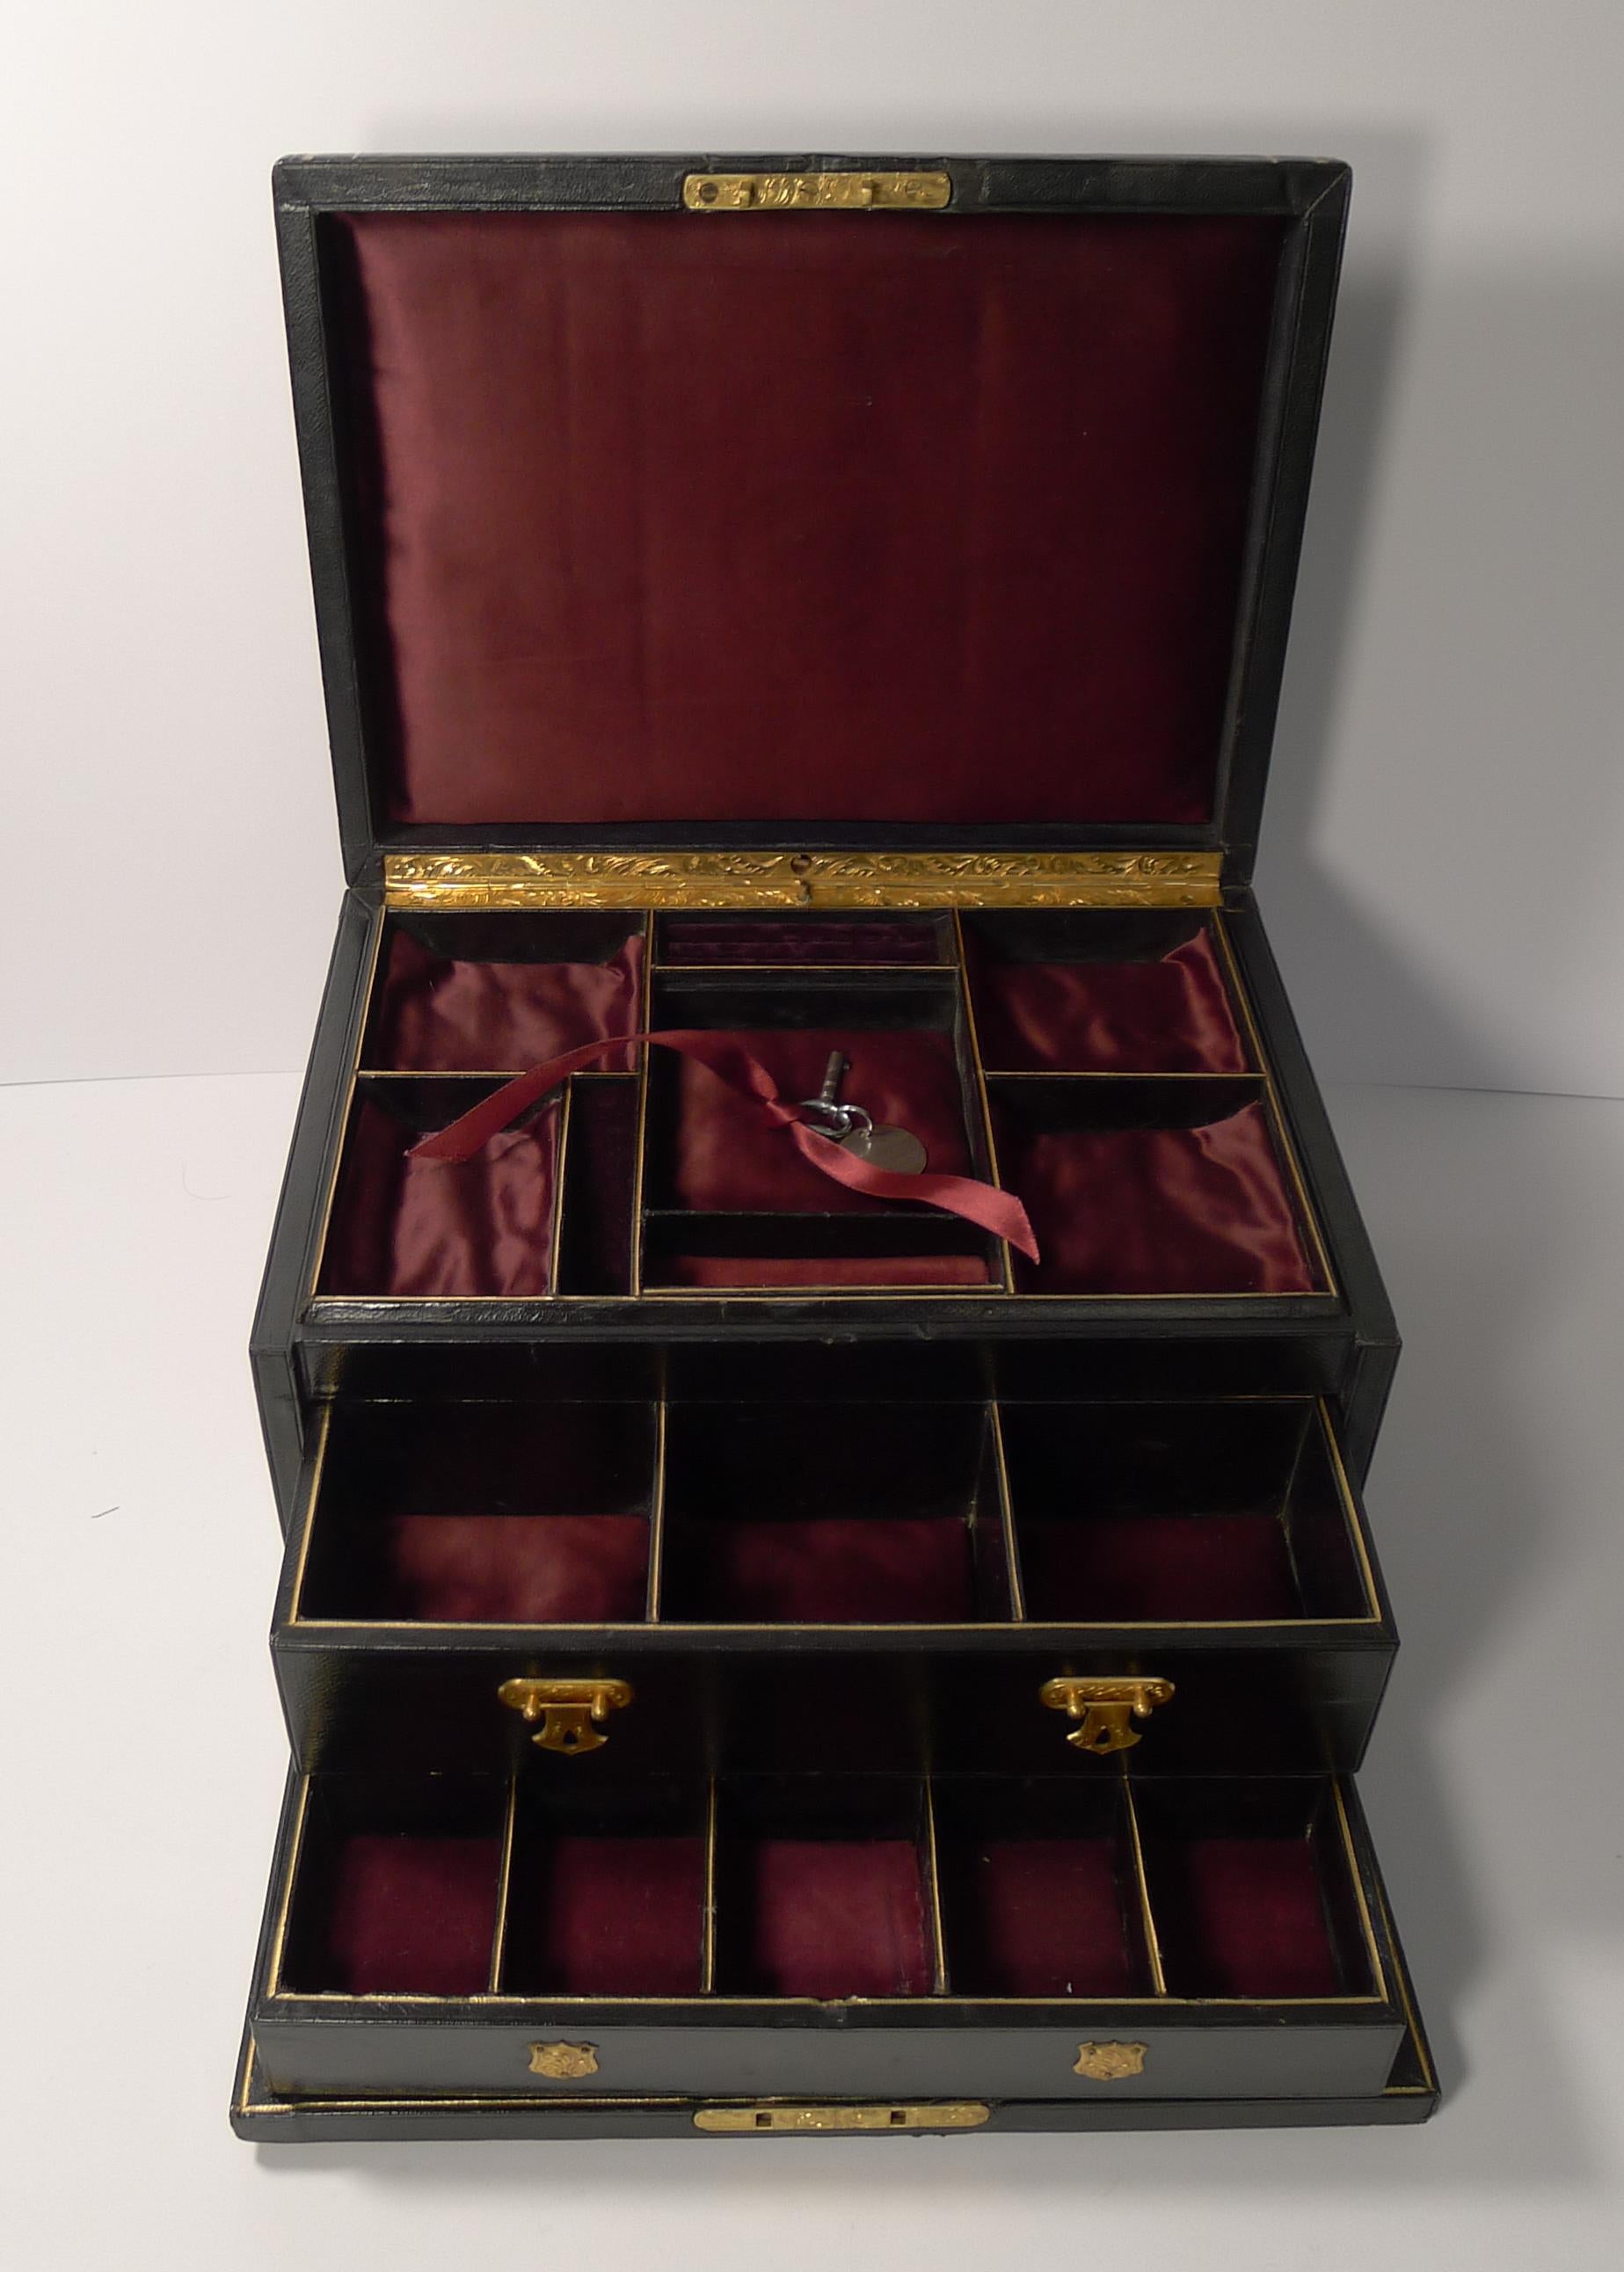 A top-notch large Victorian jewelry box covered in black leather with gold embossing and a fabulous inset gilded brass handle retaining the original gold finish, the front has a complimentary escutcheon.

The lid lifts to reveal a wonderful fitted